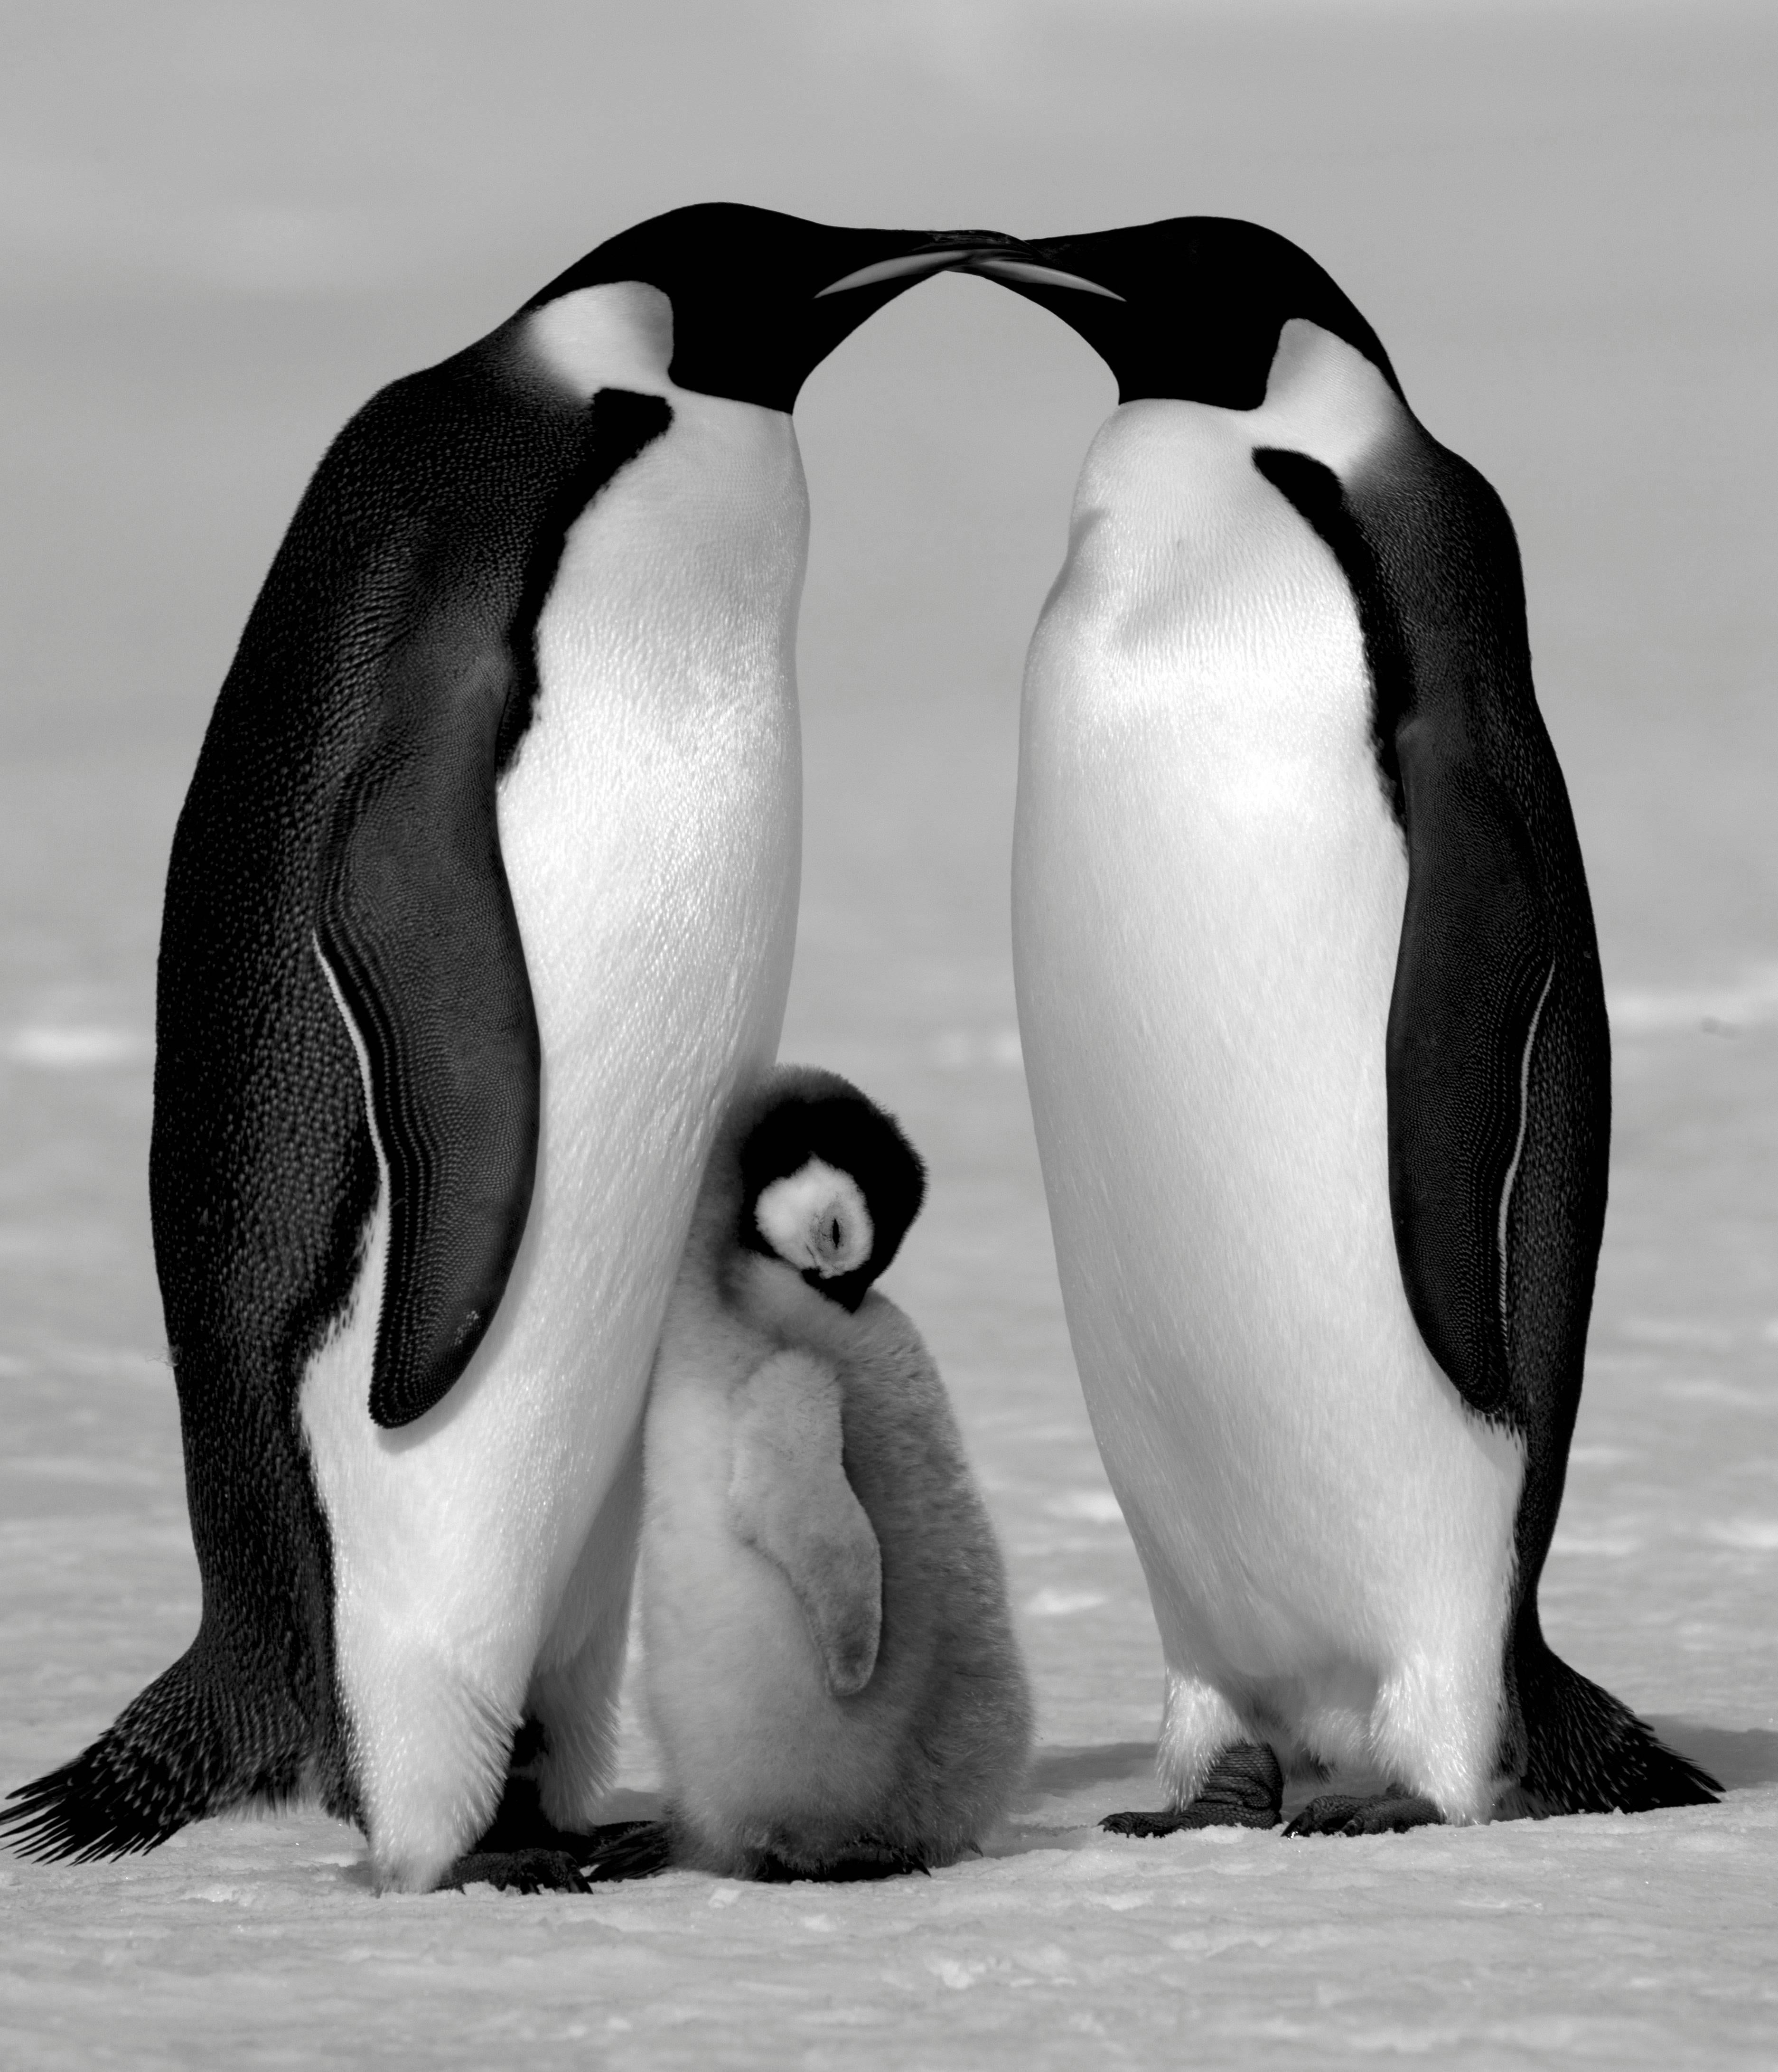 David Yarrow Black and White Photograph - Contentment